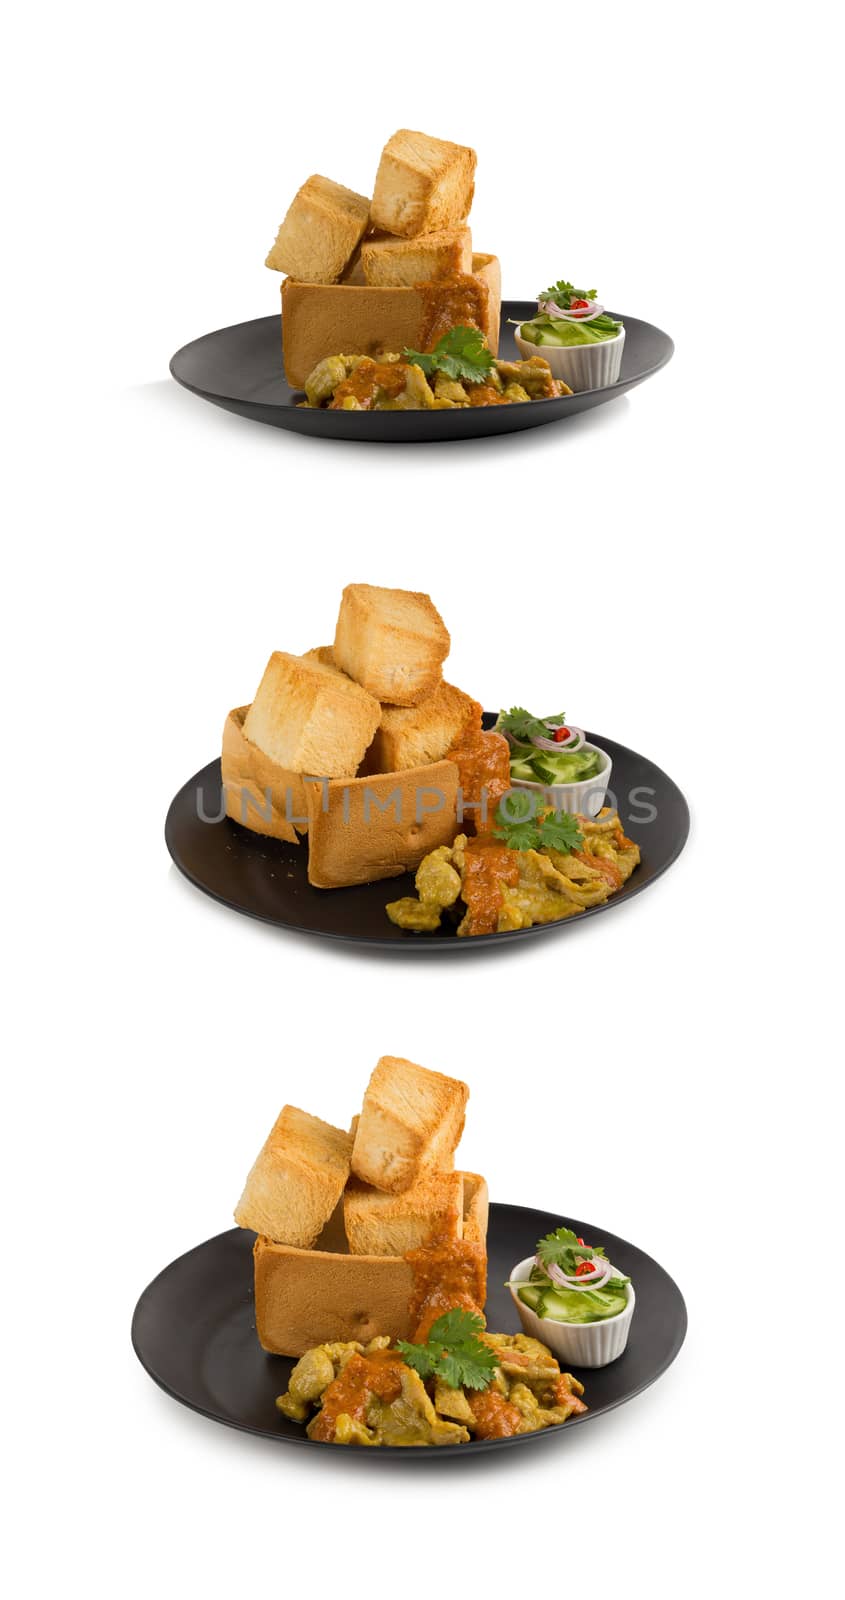 Pork satays with peanut sauce and pickles which are cucumber slices and onions in vinegar served with toast. isolated on white.